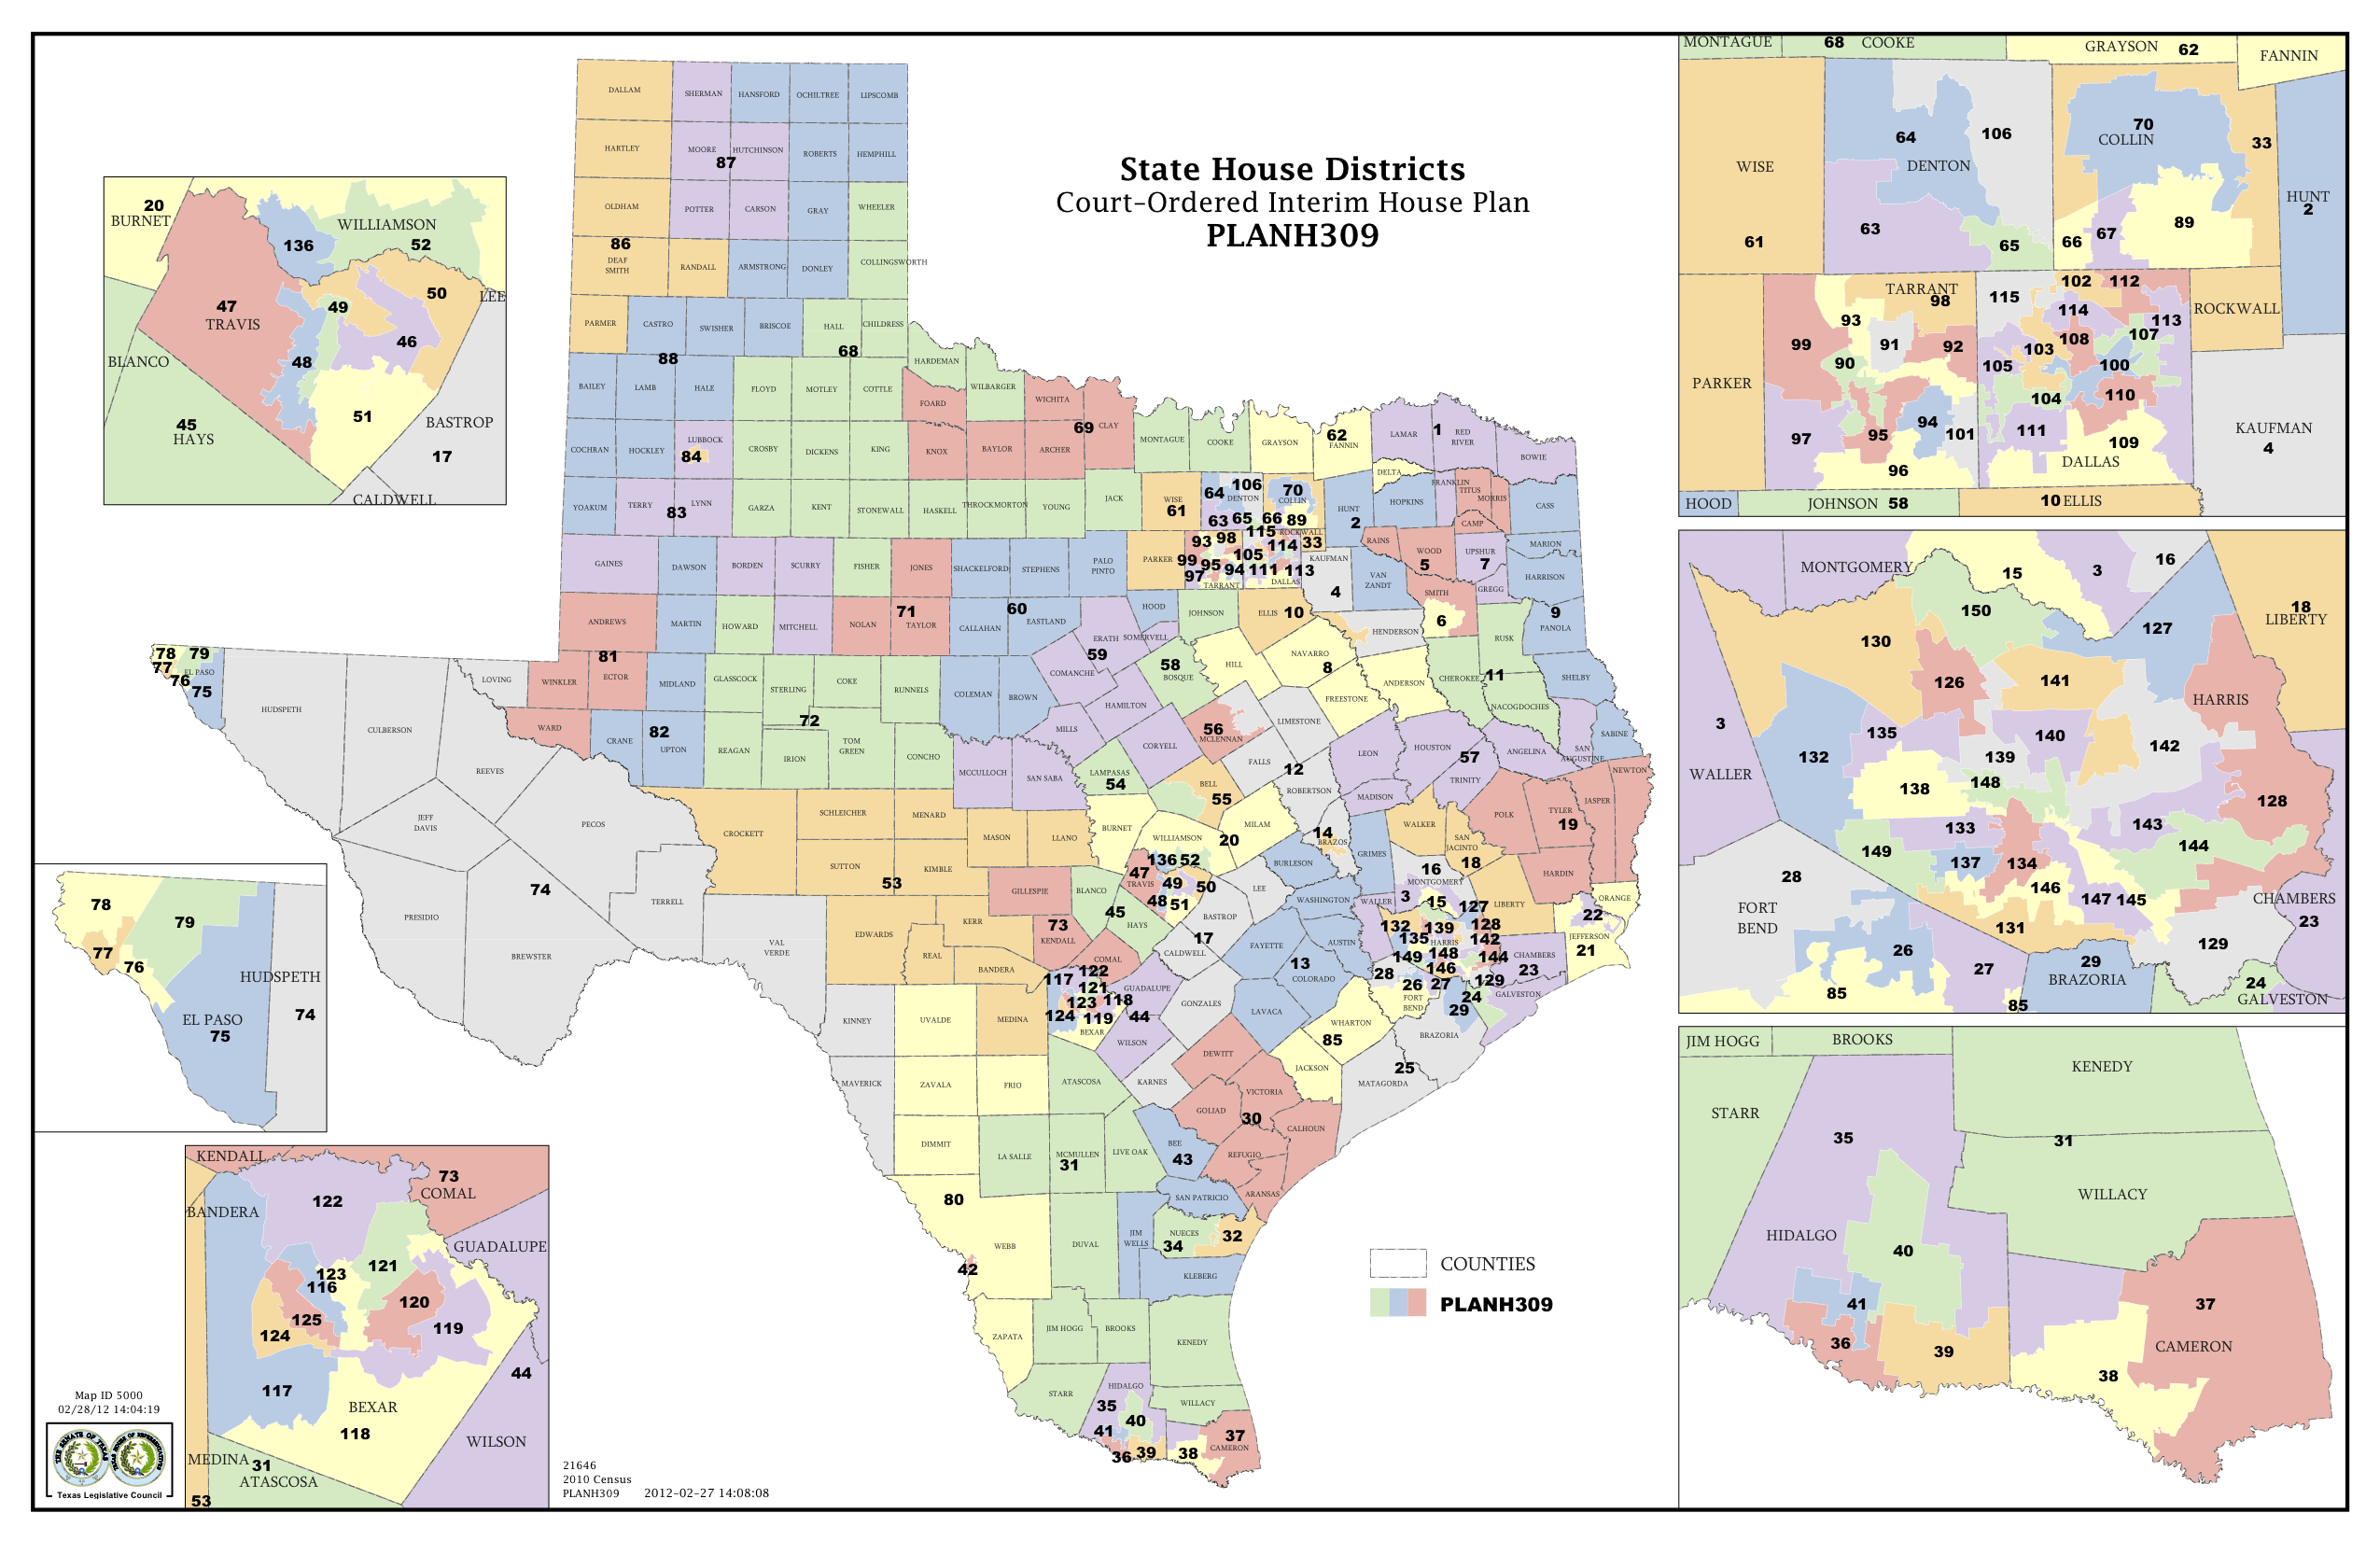 Texas House Districts Map | Business Ideas 2013 - Texas House District Map